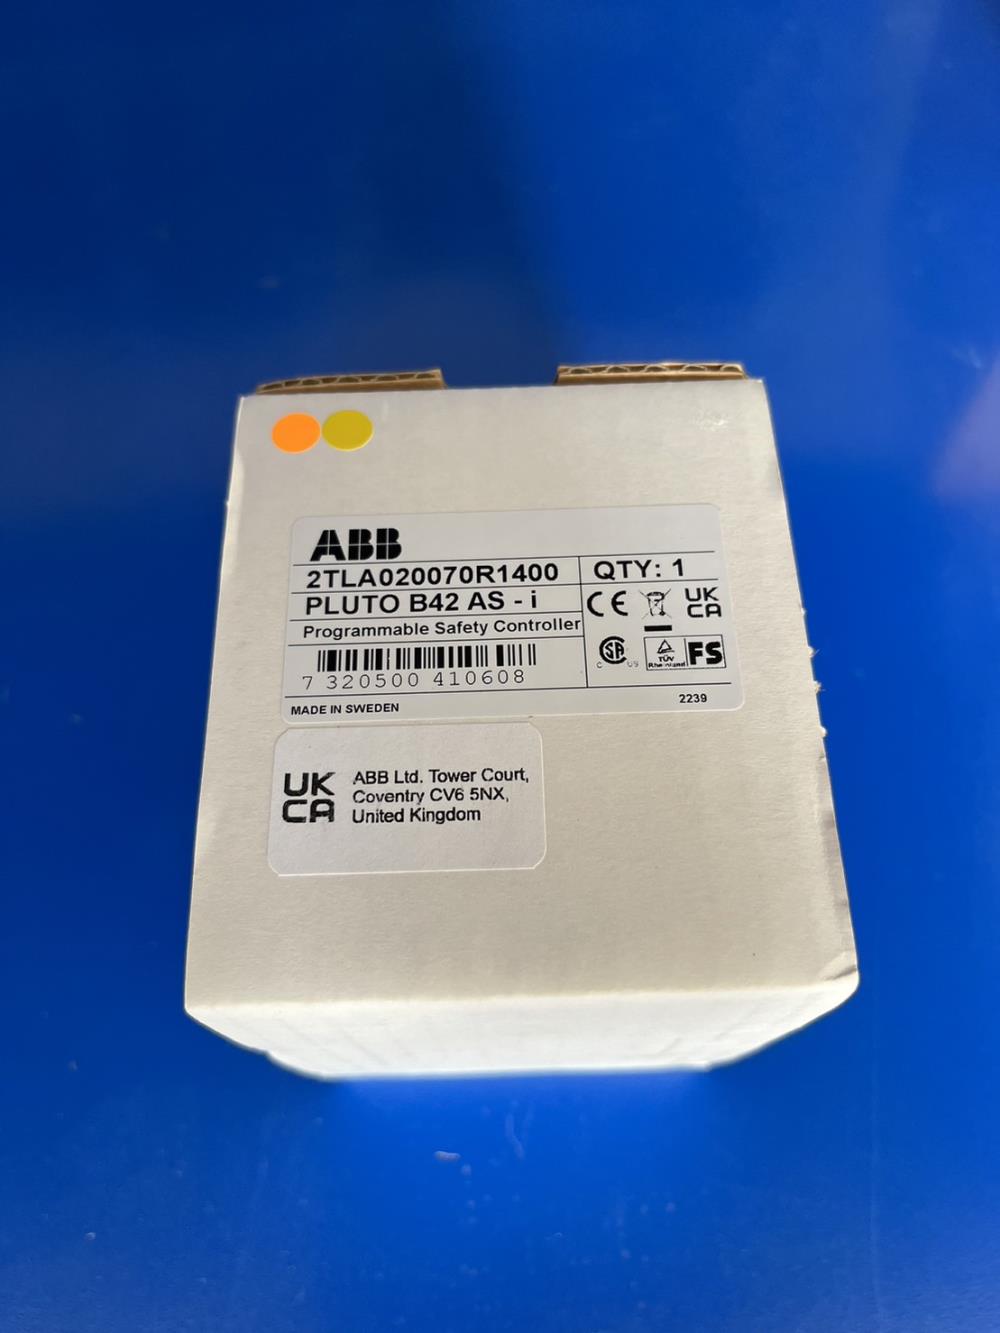 Programmable Safety Controller 2TLA020070R1400 Pluto B42 AS-i,2TLA020070R1400 Pluto  B42 AS-i,ABB,Automation and Electronics/Automation Equipment/General Automation Equipment